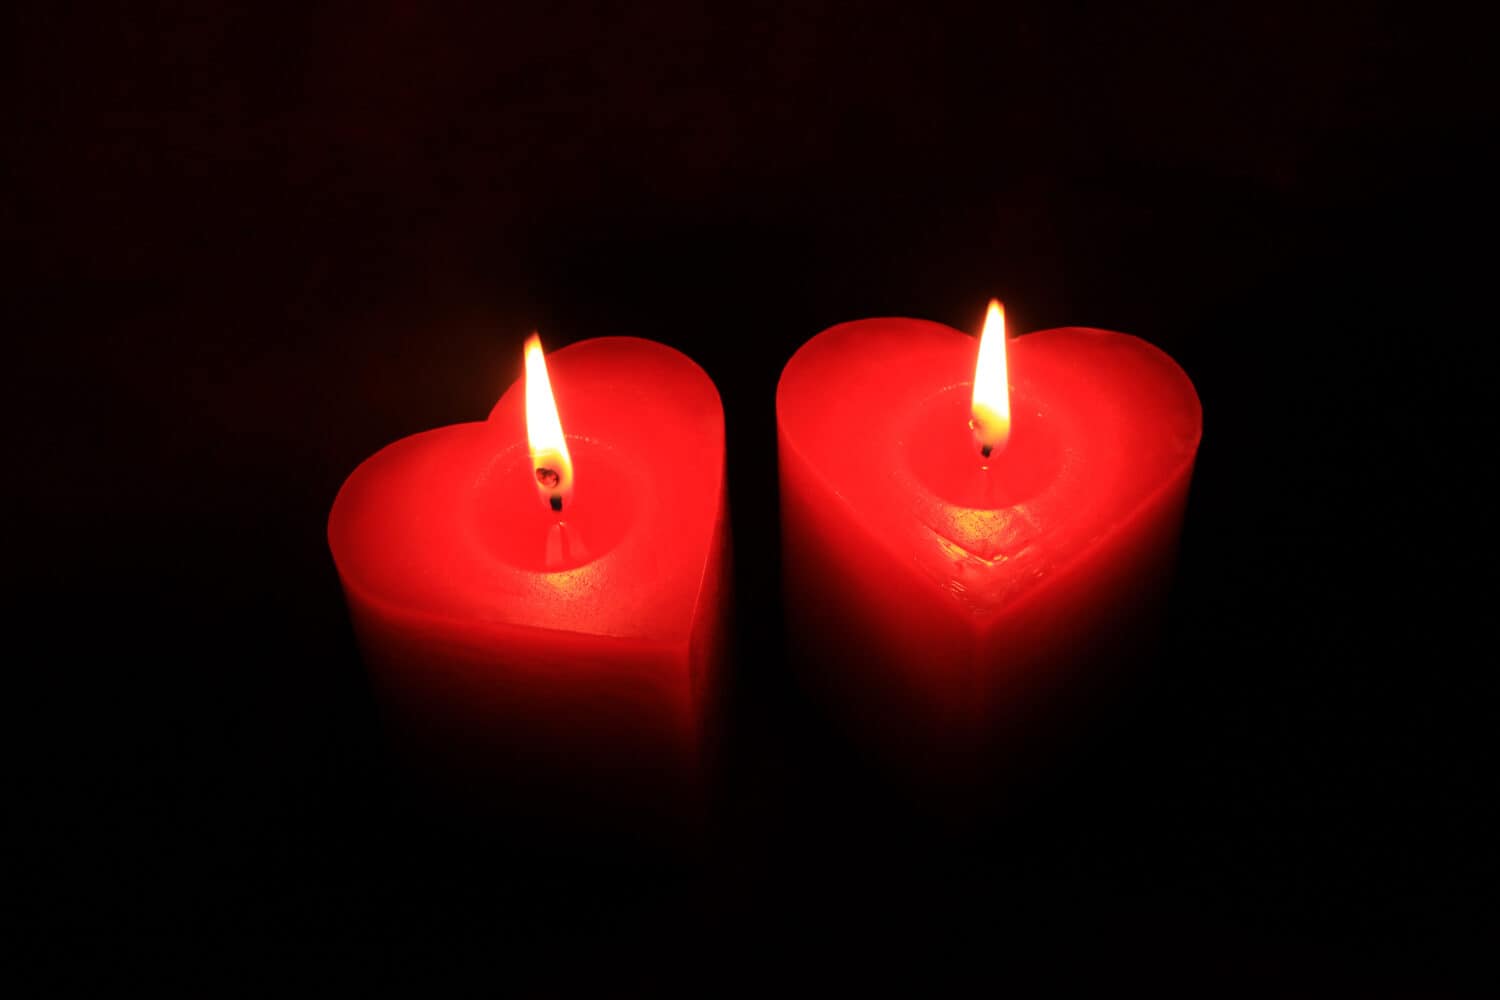 Two flames burning in dark . Two heart shaped red candles on black background